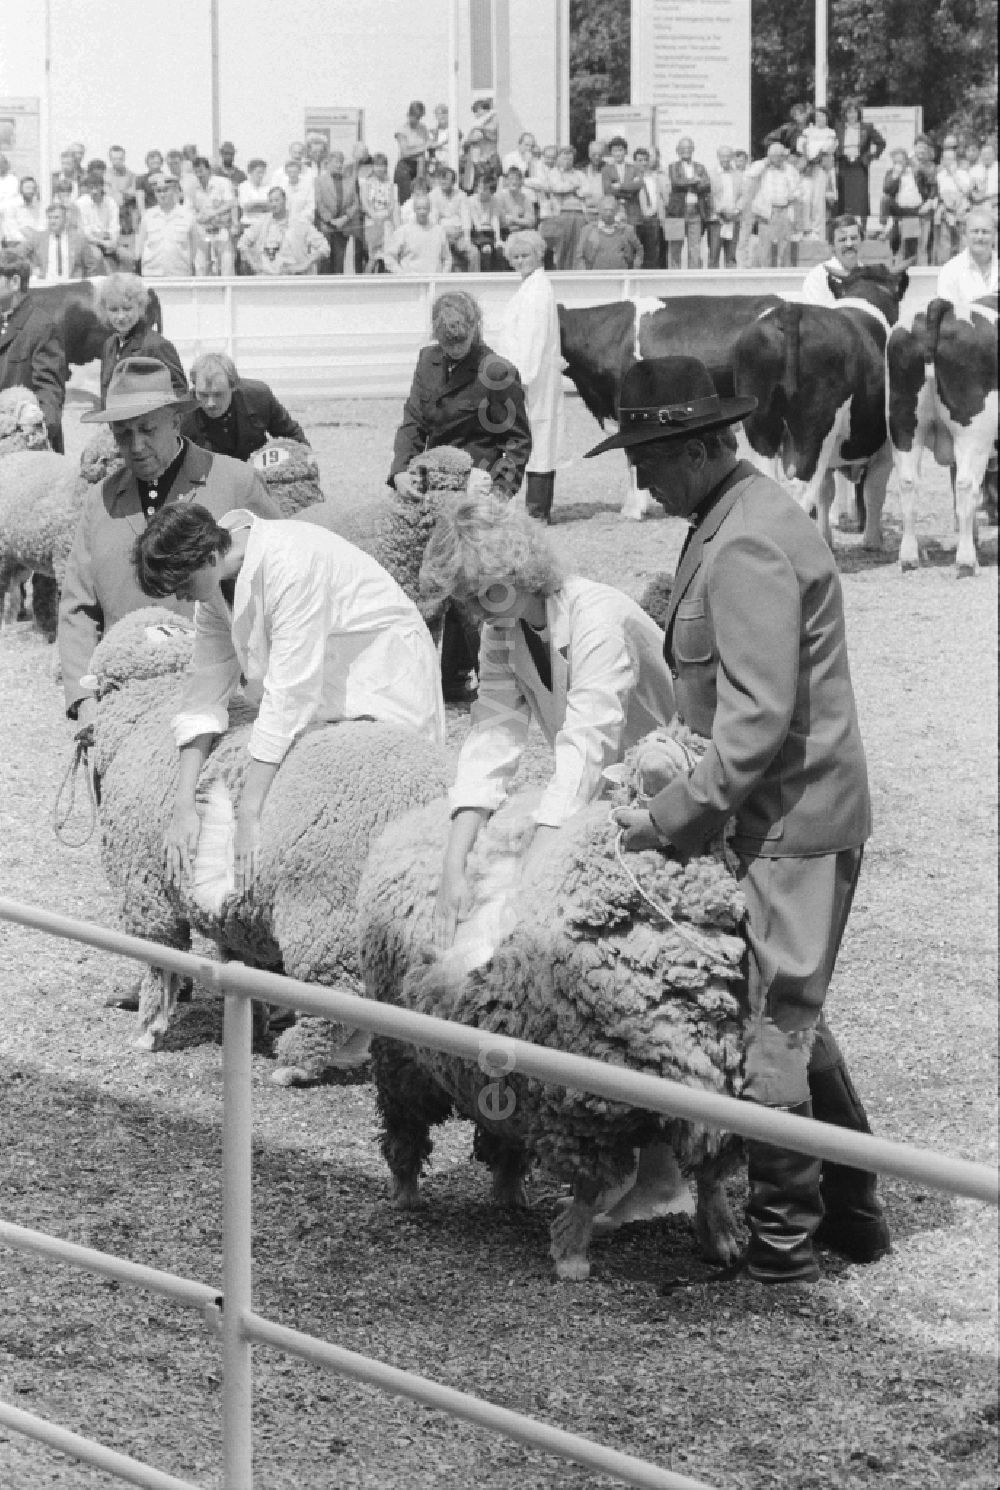 Markkleeberg: Sheep show at the Agricultural Fair AGRA 89 in Markkleeberg in Saxony in the area of the former GDR, German Democratic Republic